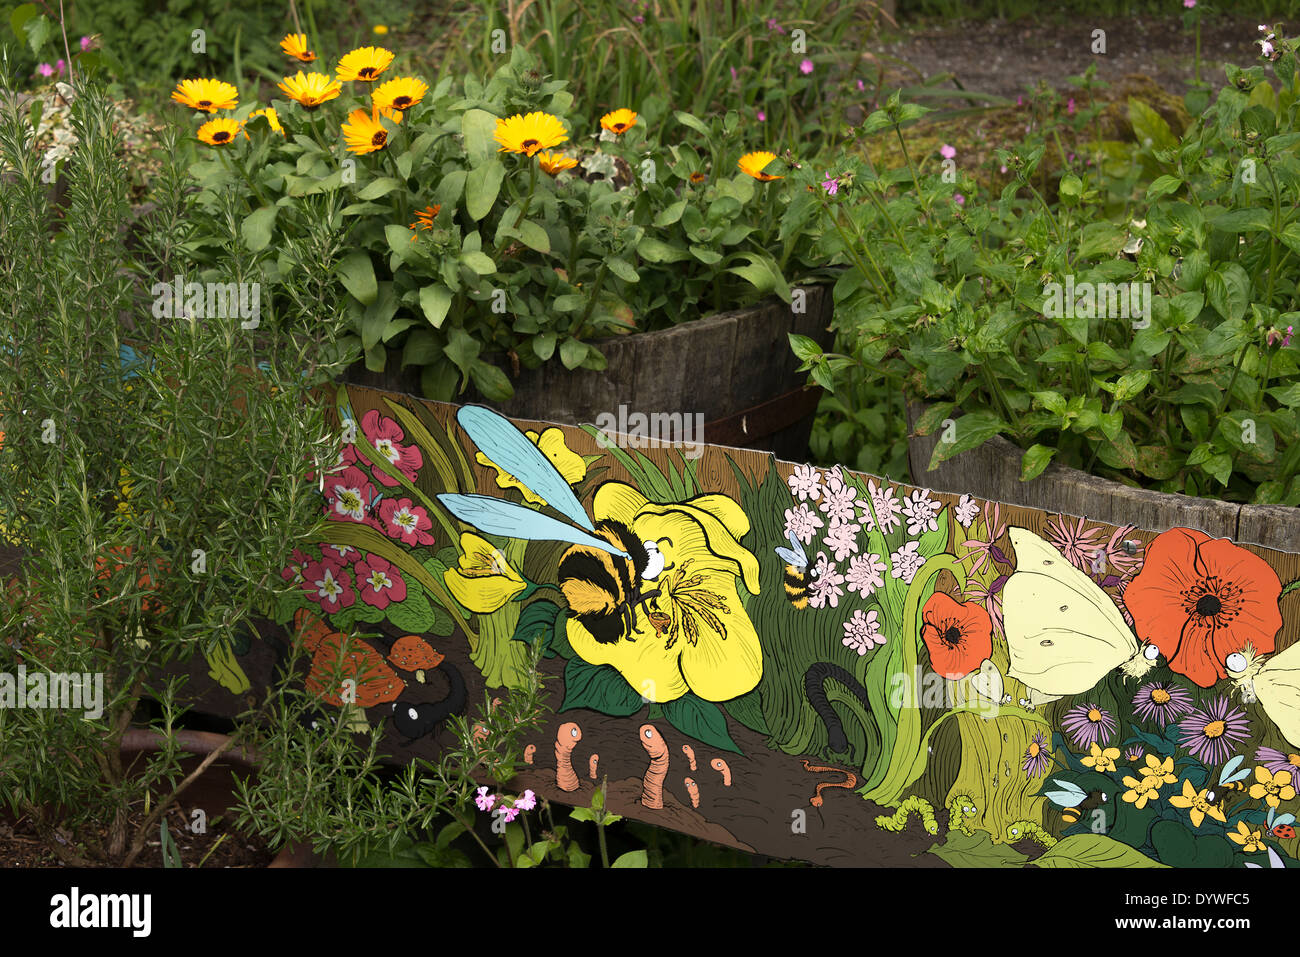 A Brightly Painted Wooden Trough Filled with Plants in a Wild Garden in The Dearne Valley Yorkshire England United Kingdom UK Stock Photo